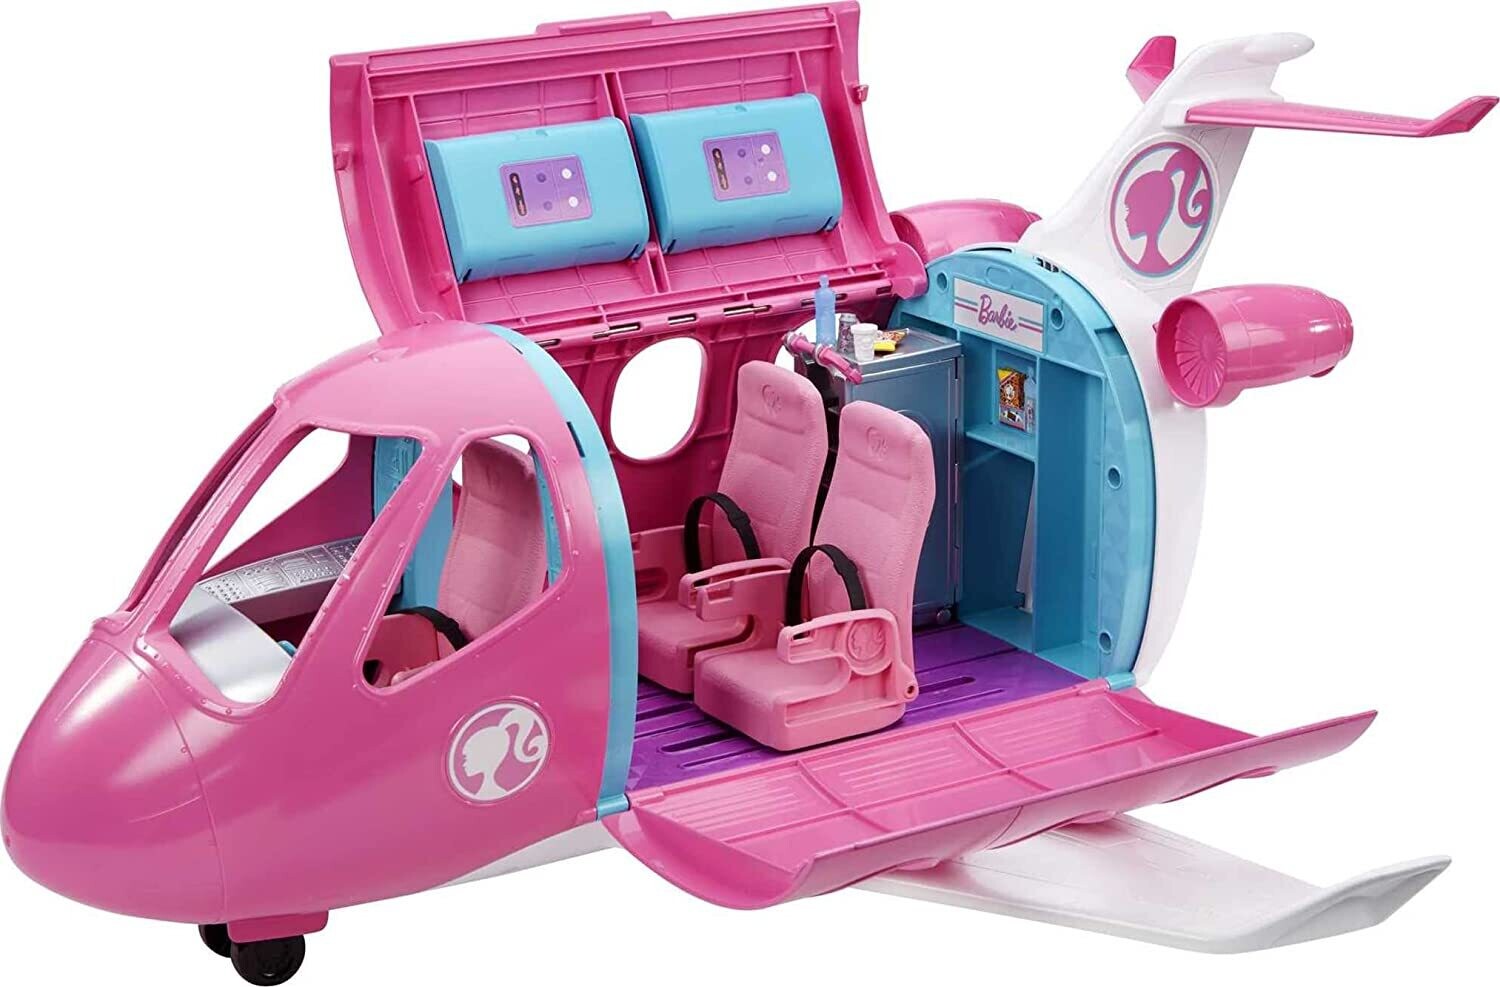 Dream Plane, Vehicle Playset and Accessories